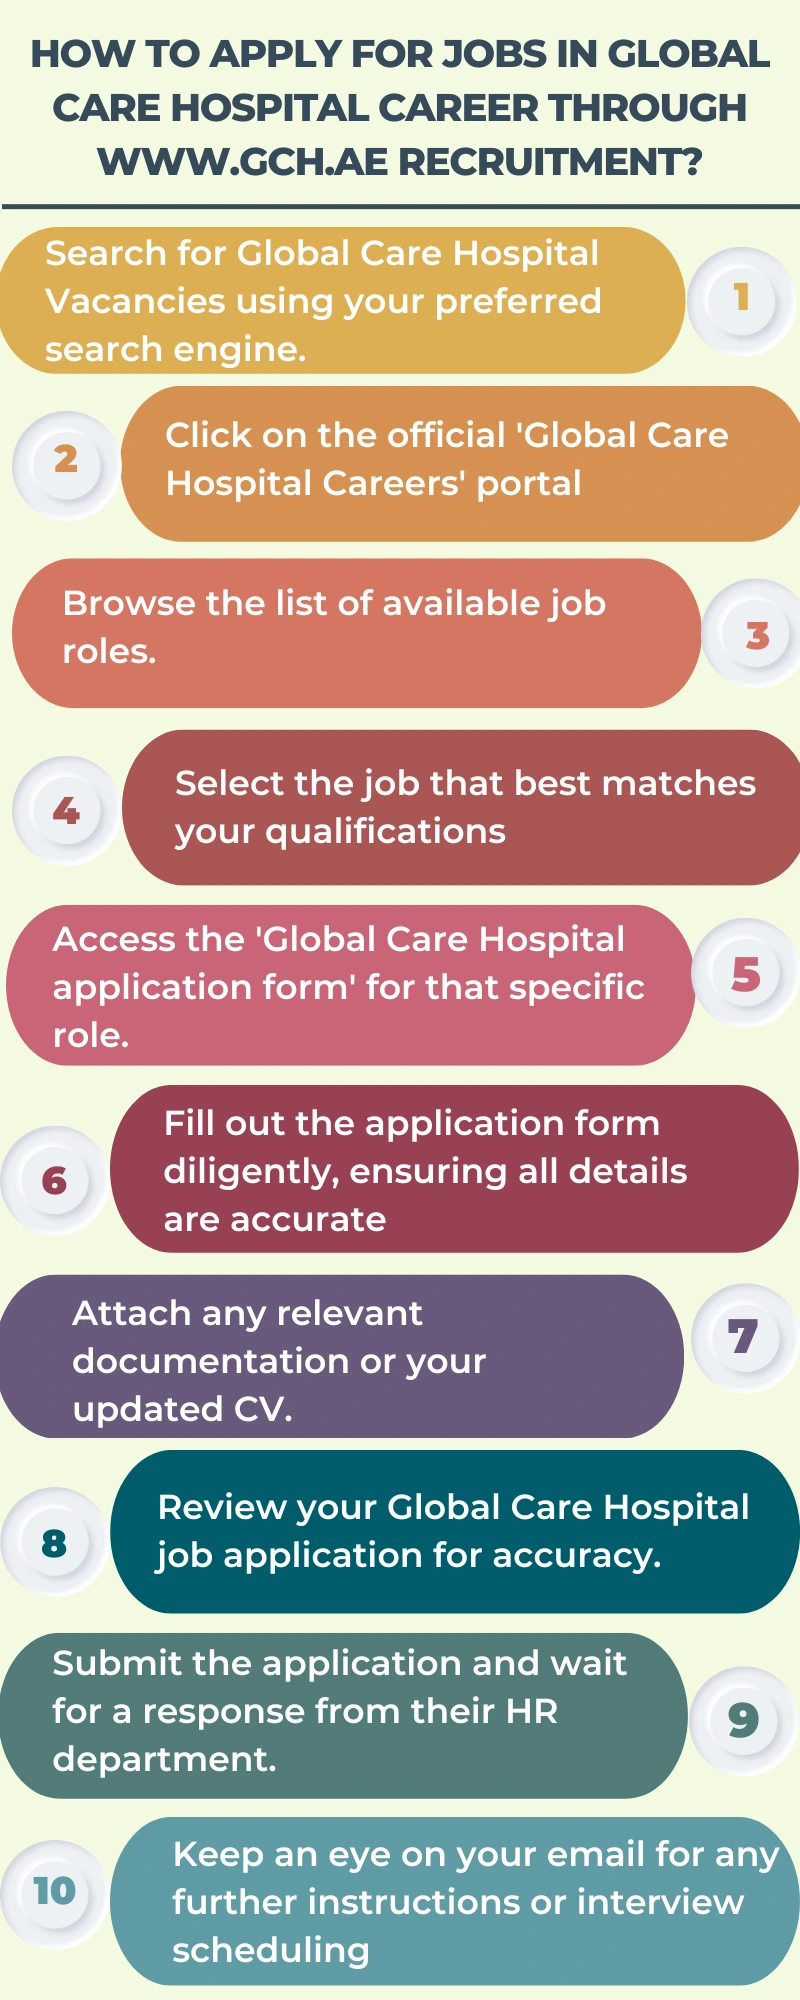 How to Apply for Jobs in Global Care Hospital Career through www.gch.ae recruitment?